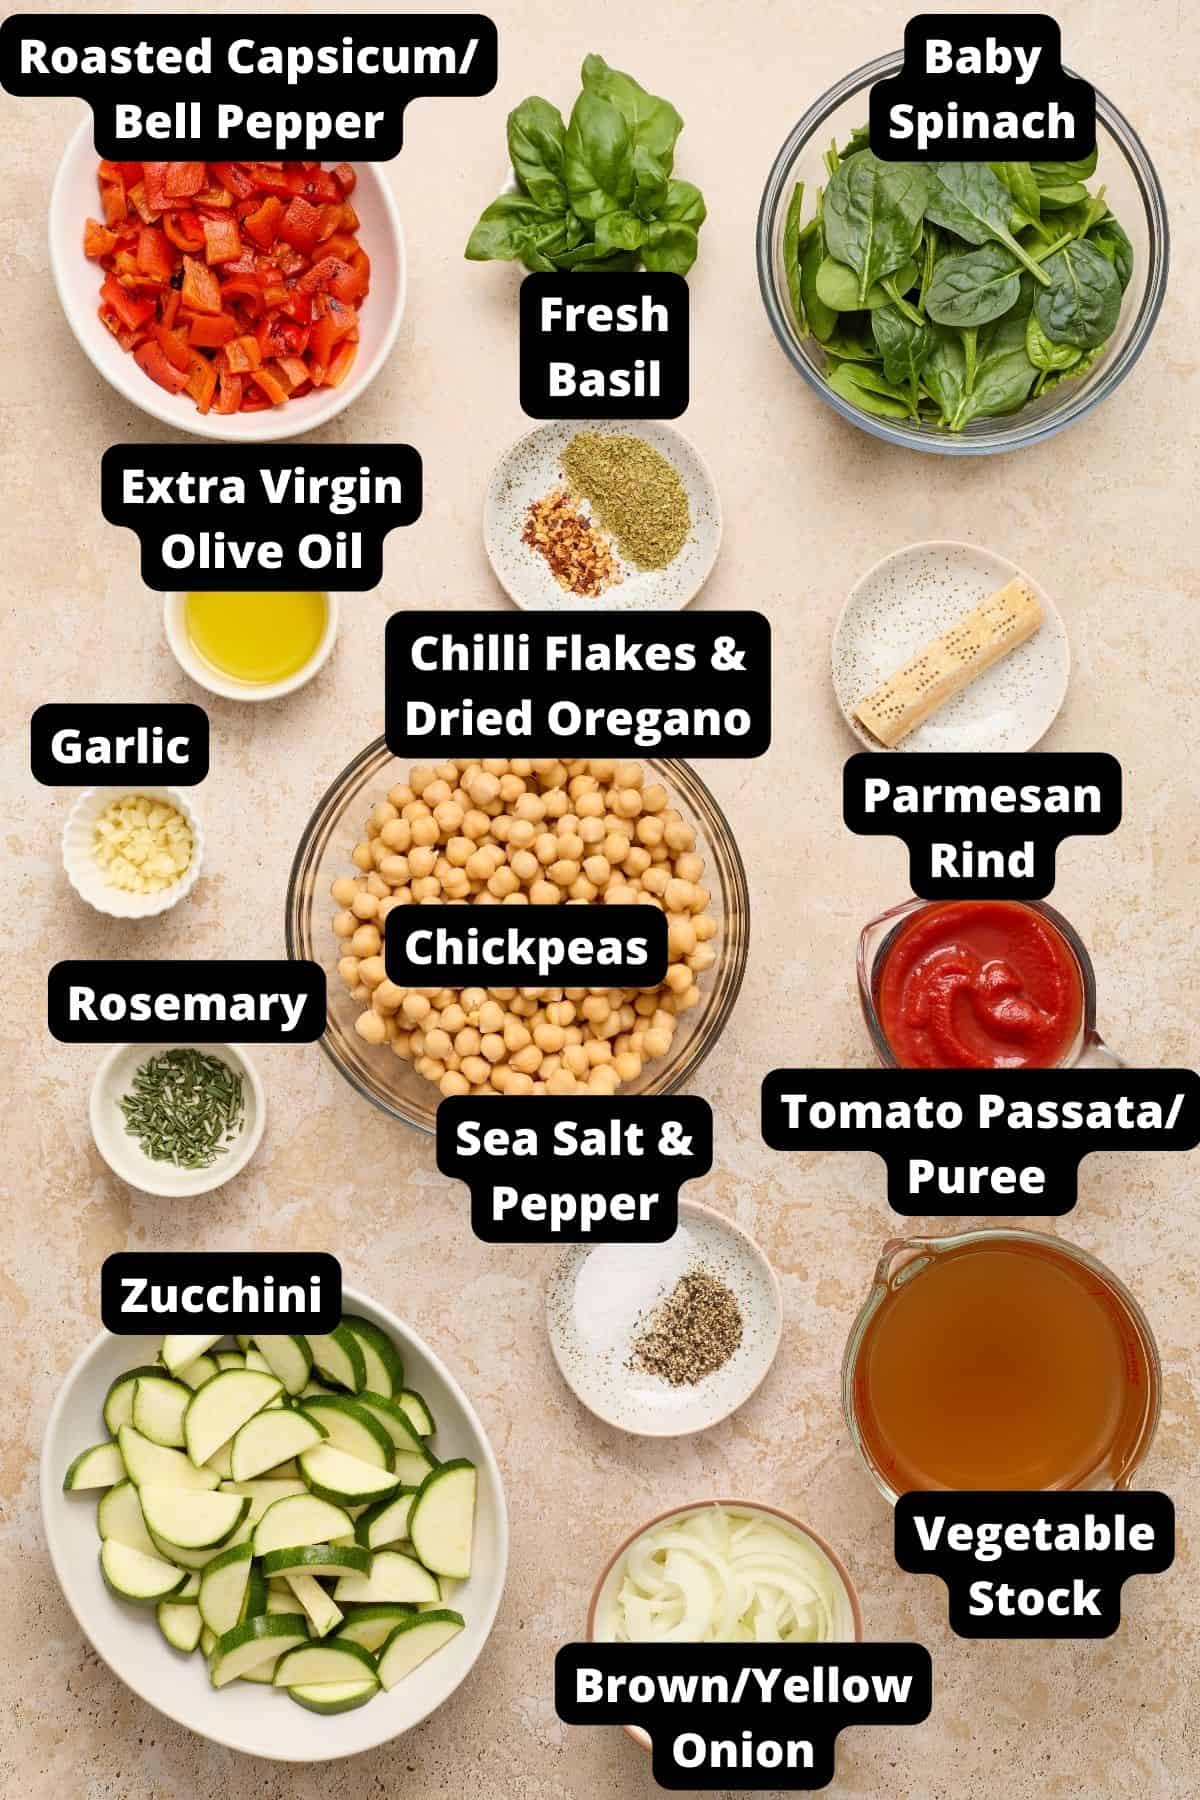 Ingredients in this recipe on a beige and white background.